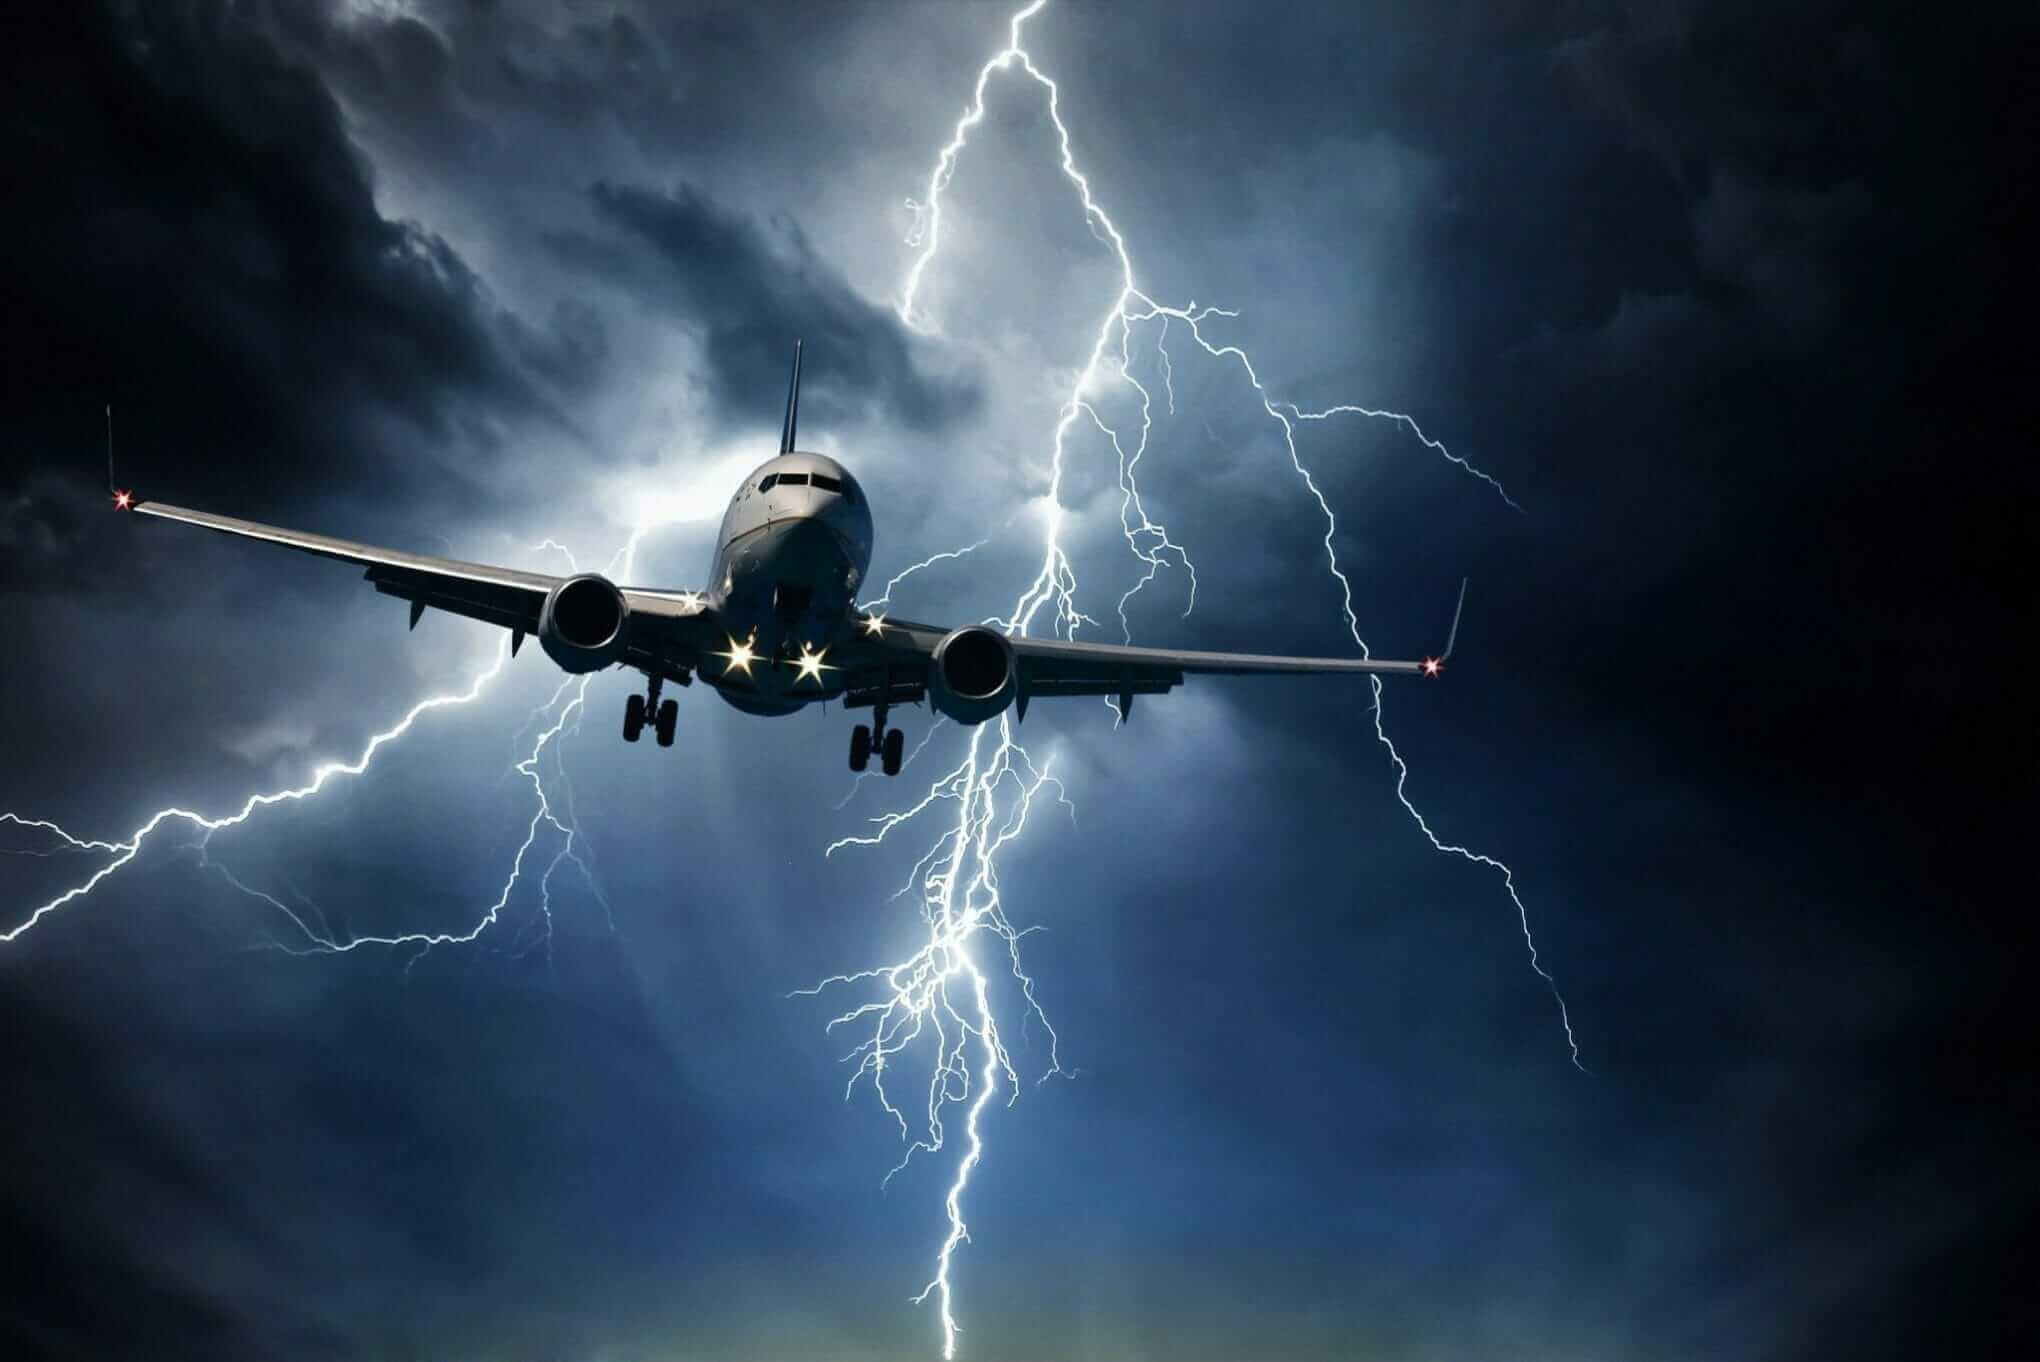 Scary Airplane Thunder Storm Scaled